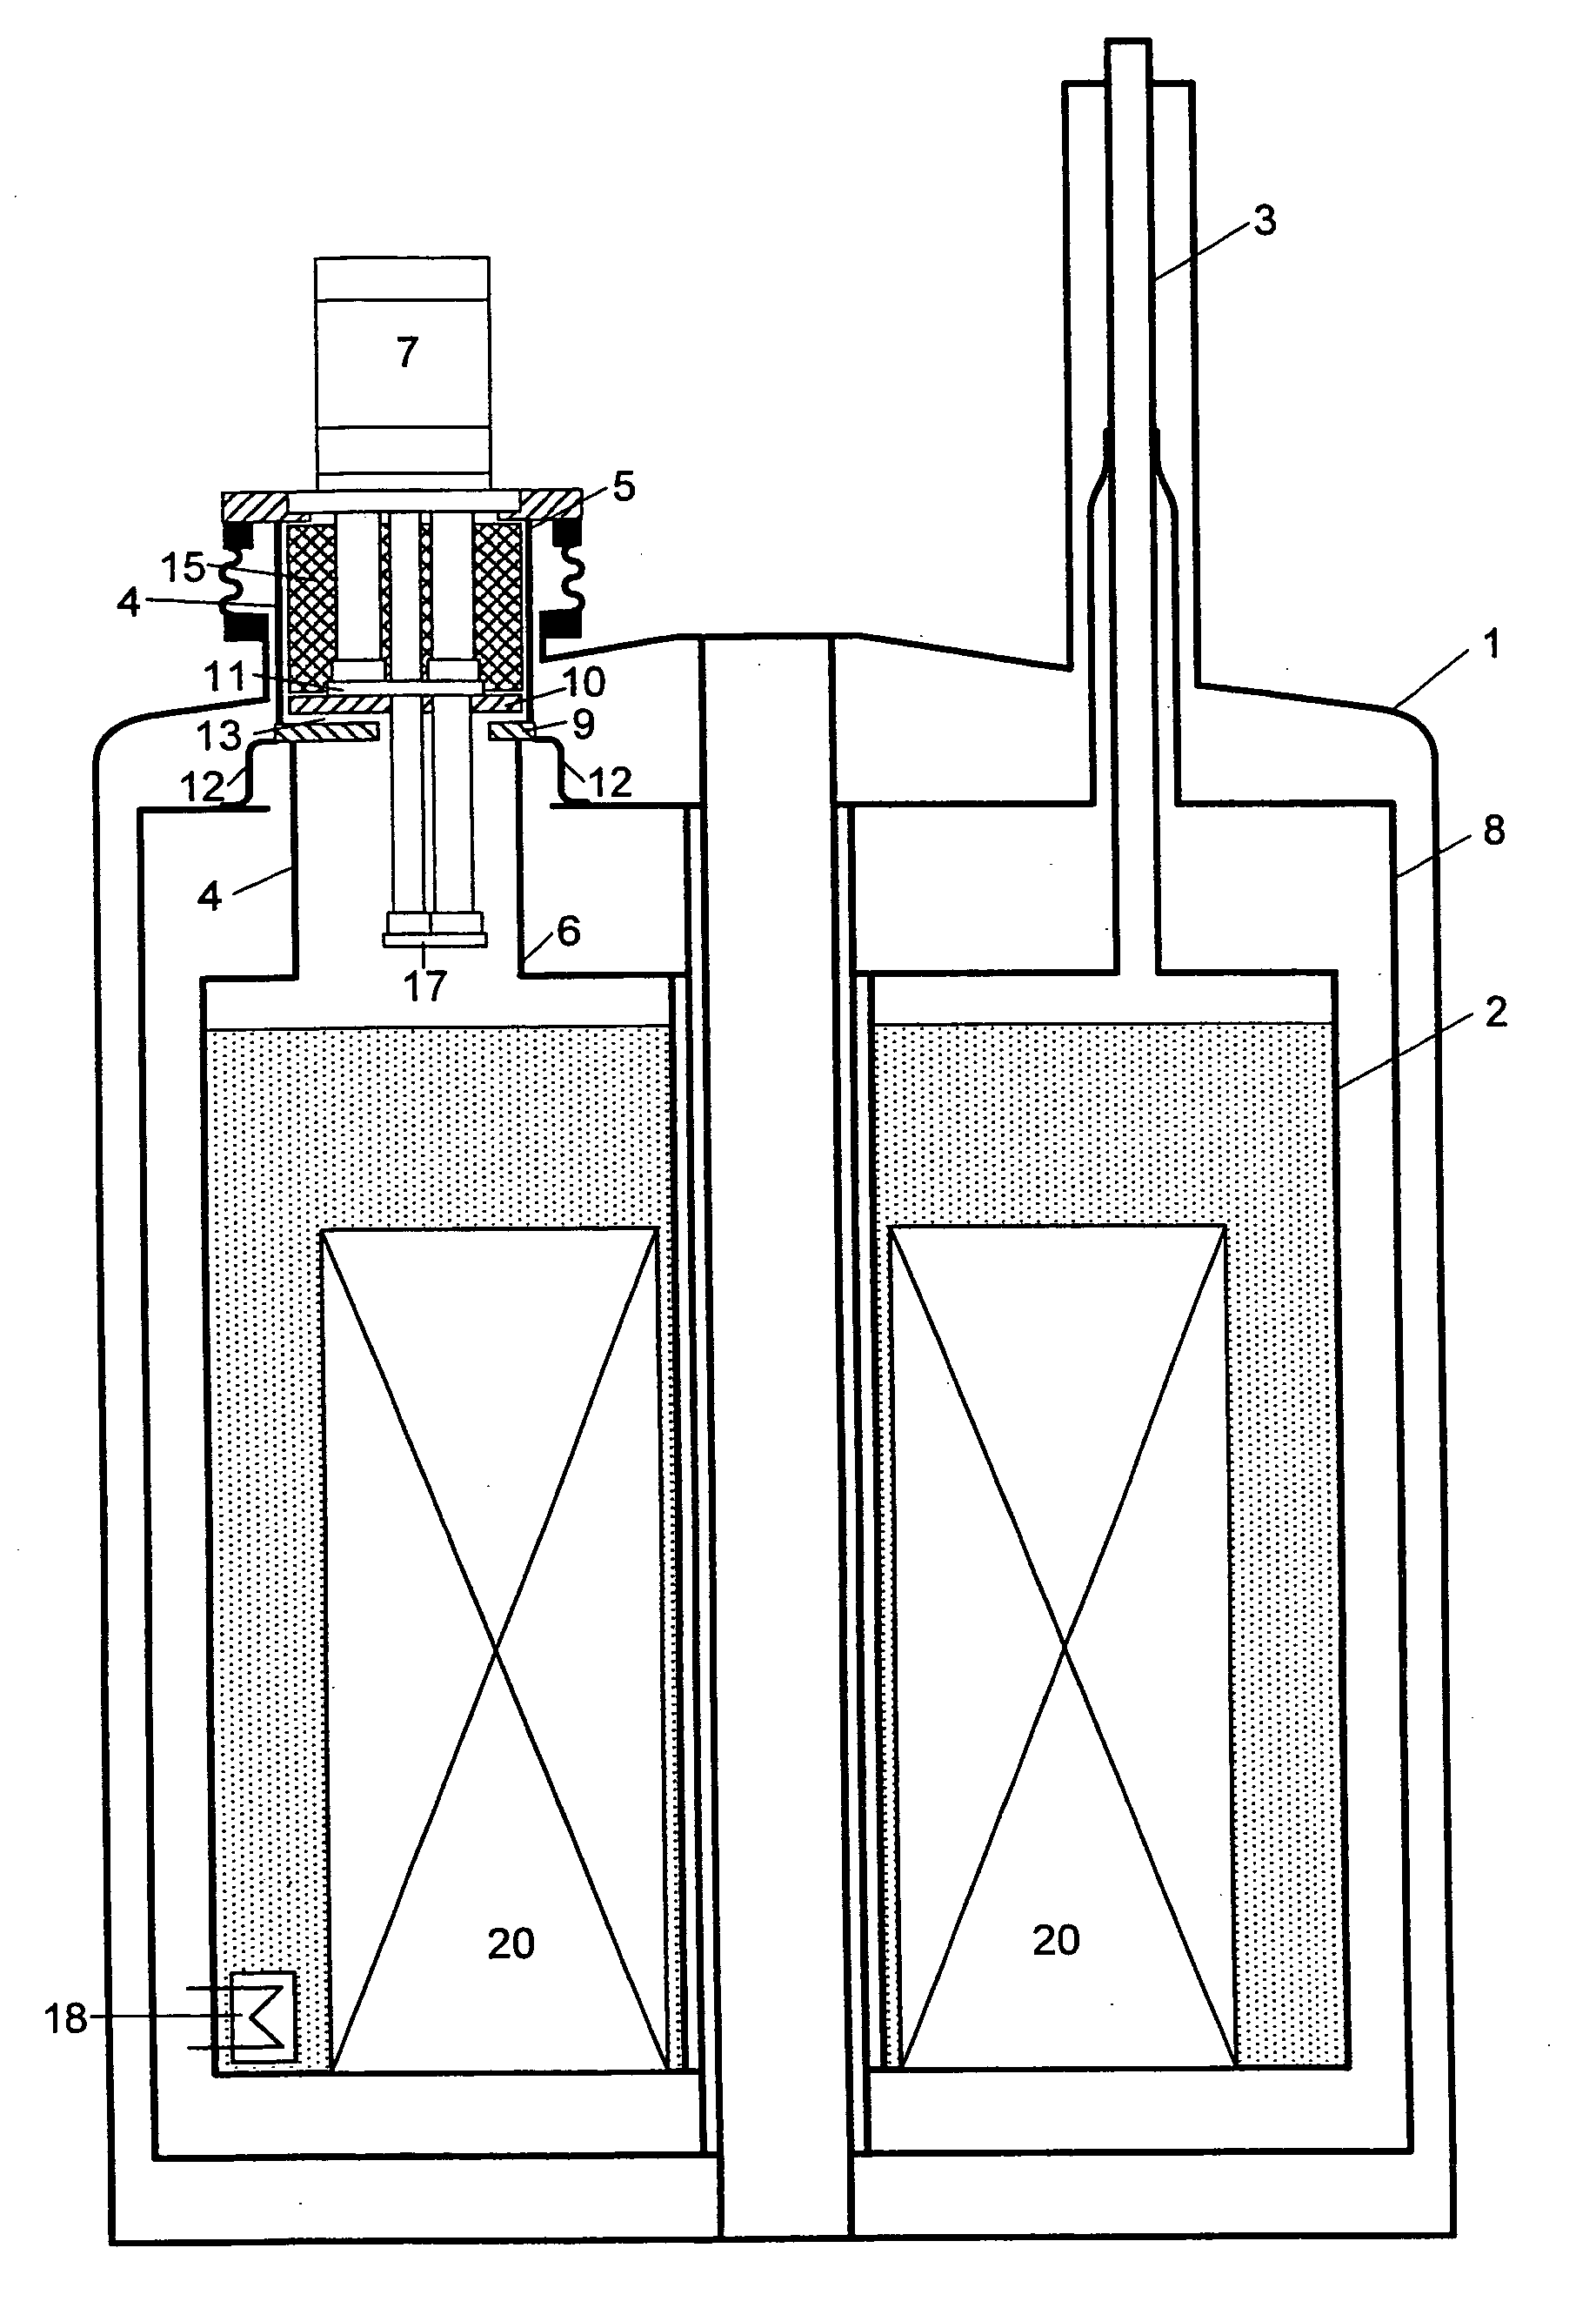 Cryostat configuration with cryocooler and gas gap heat transfer device